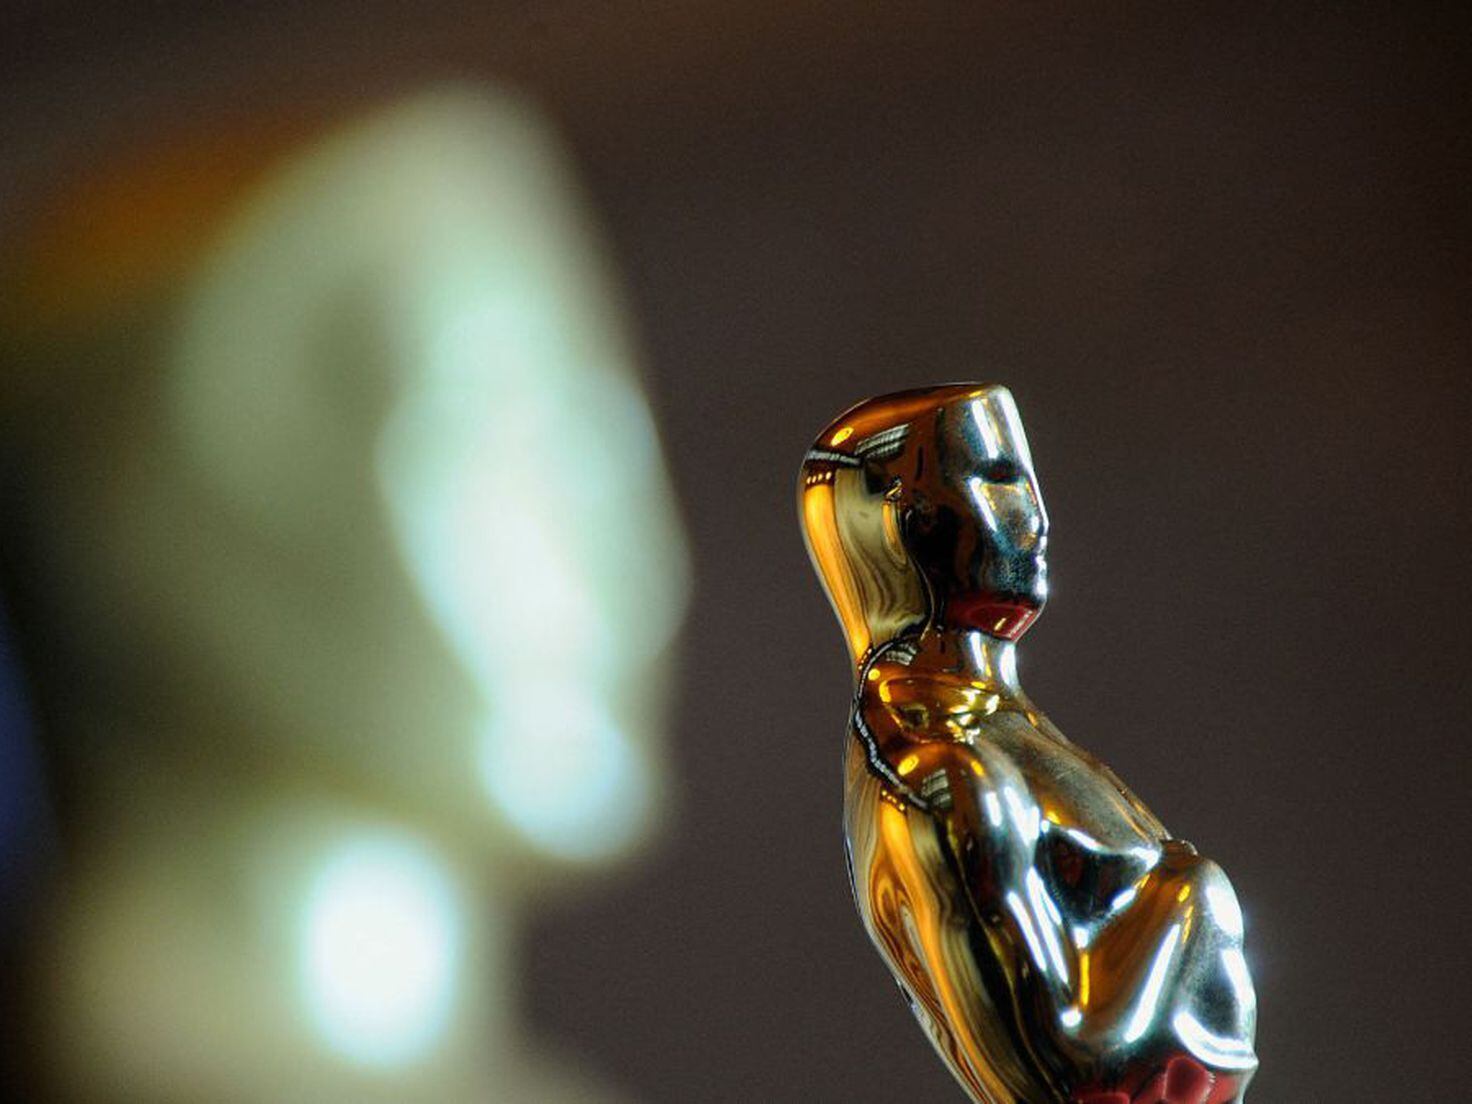 The 2022 Oscars show will have a host